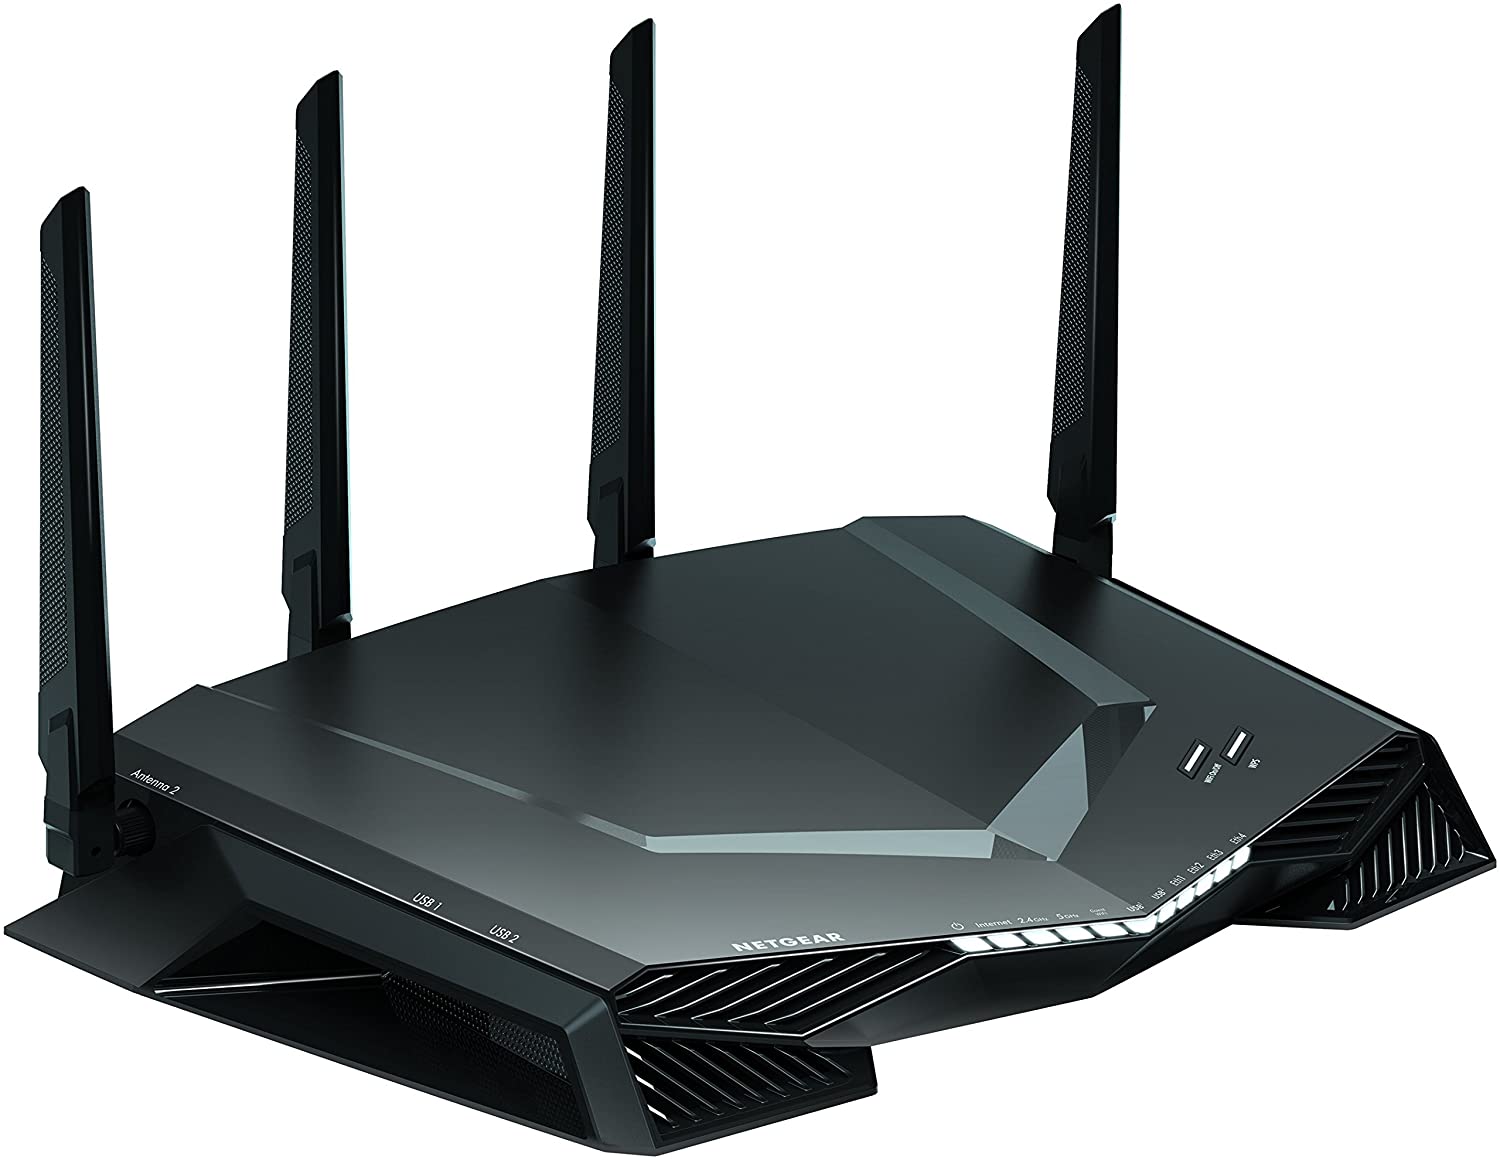 best wifi router 2018 for mac